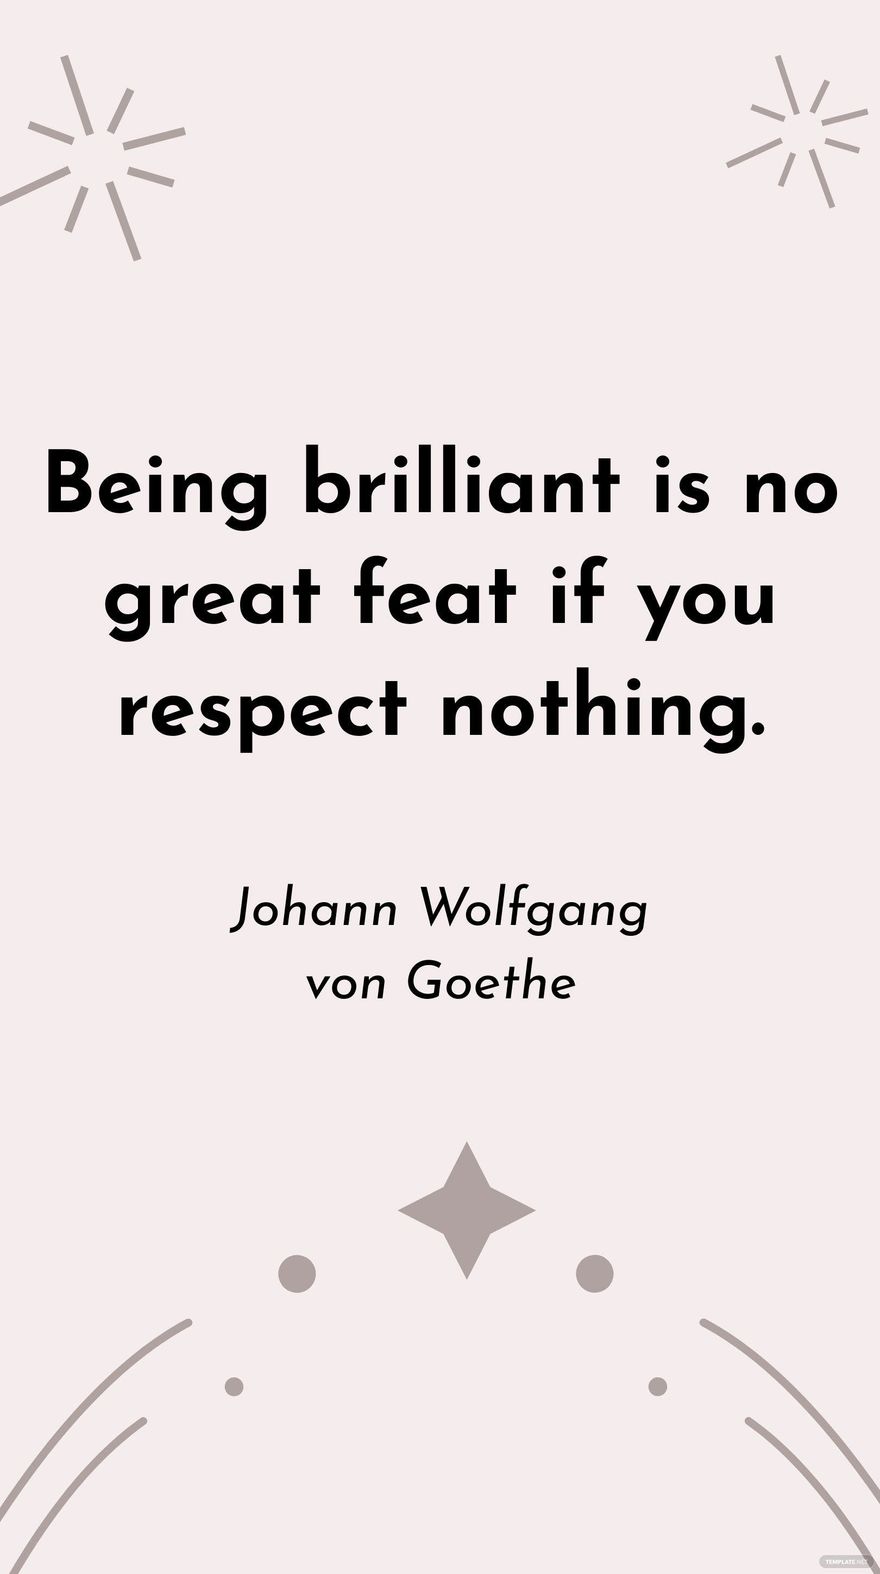 Free Johann Wolfgang von Goethe - Being brilliant is no great feat if you respect nothing. in JPG